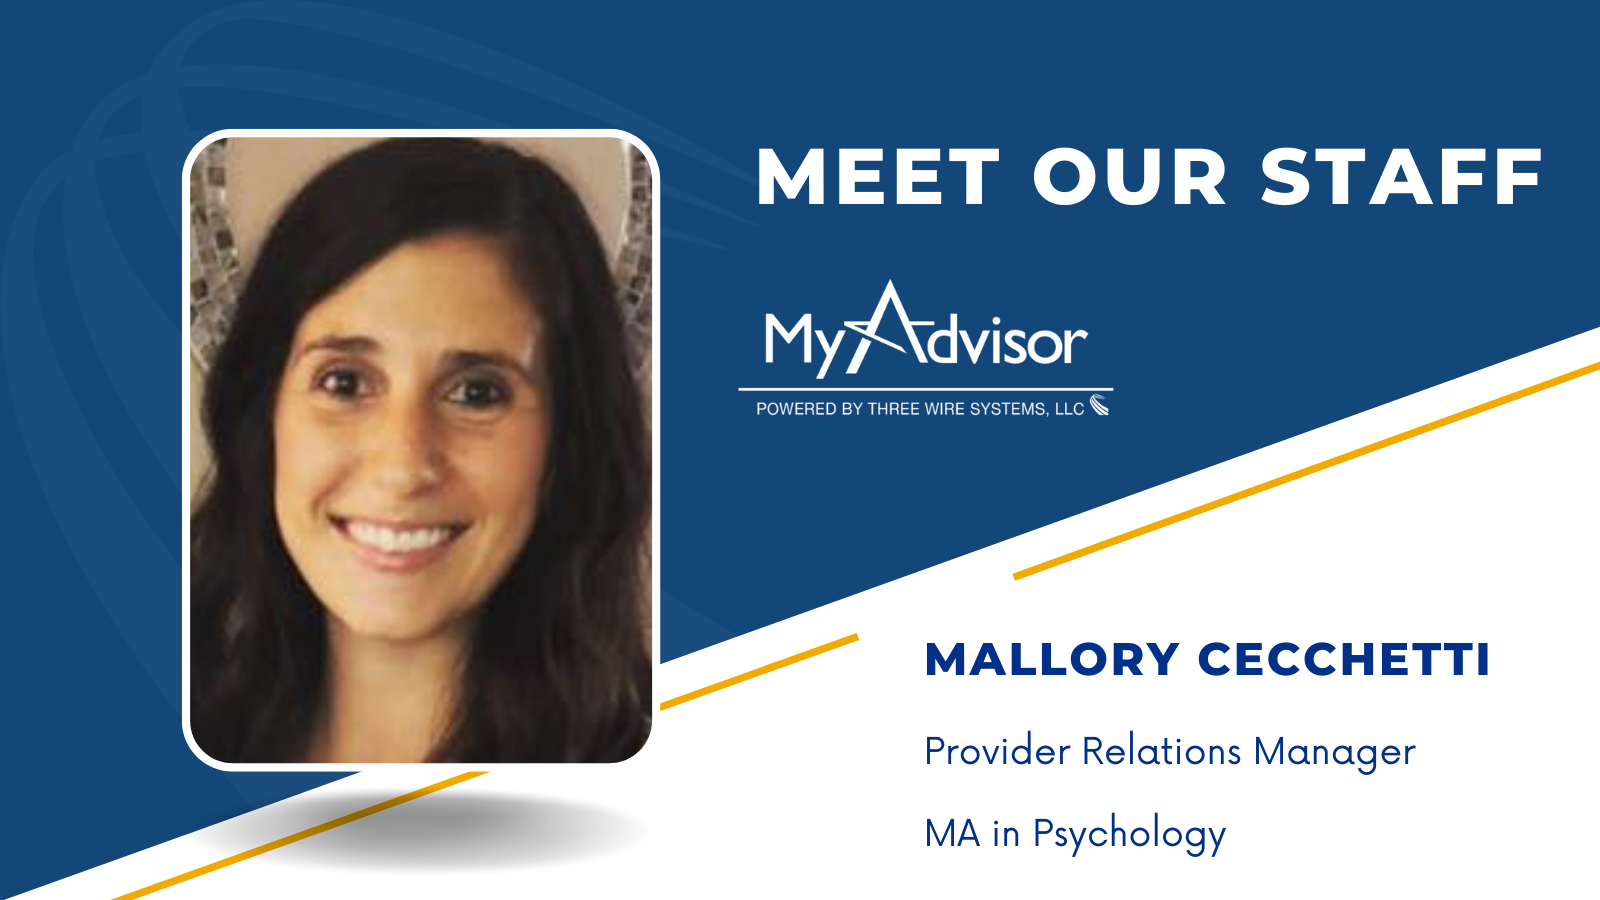 Meet Our Staff - Mallory Cecchetti, Provider Relations Manager